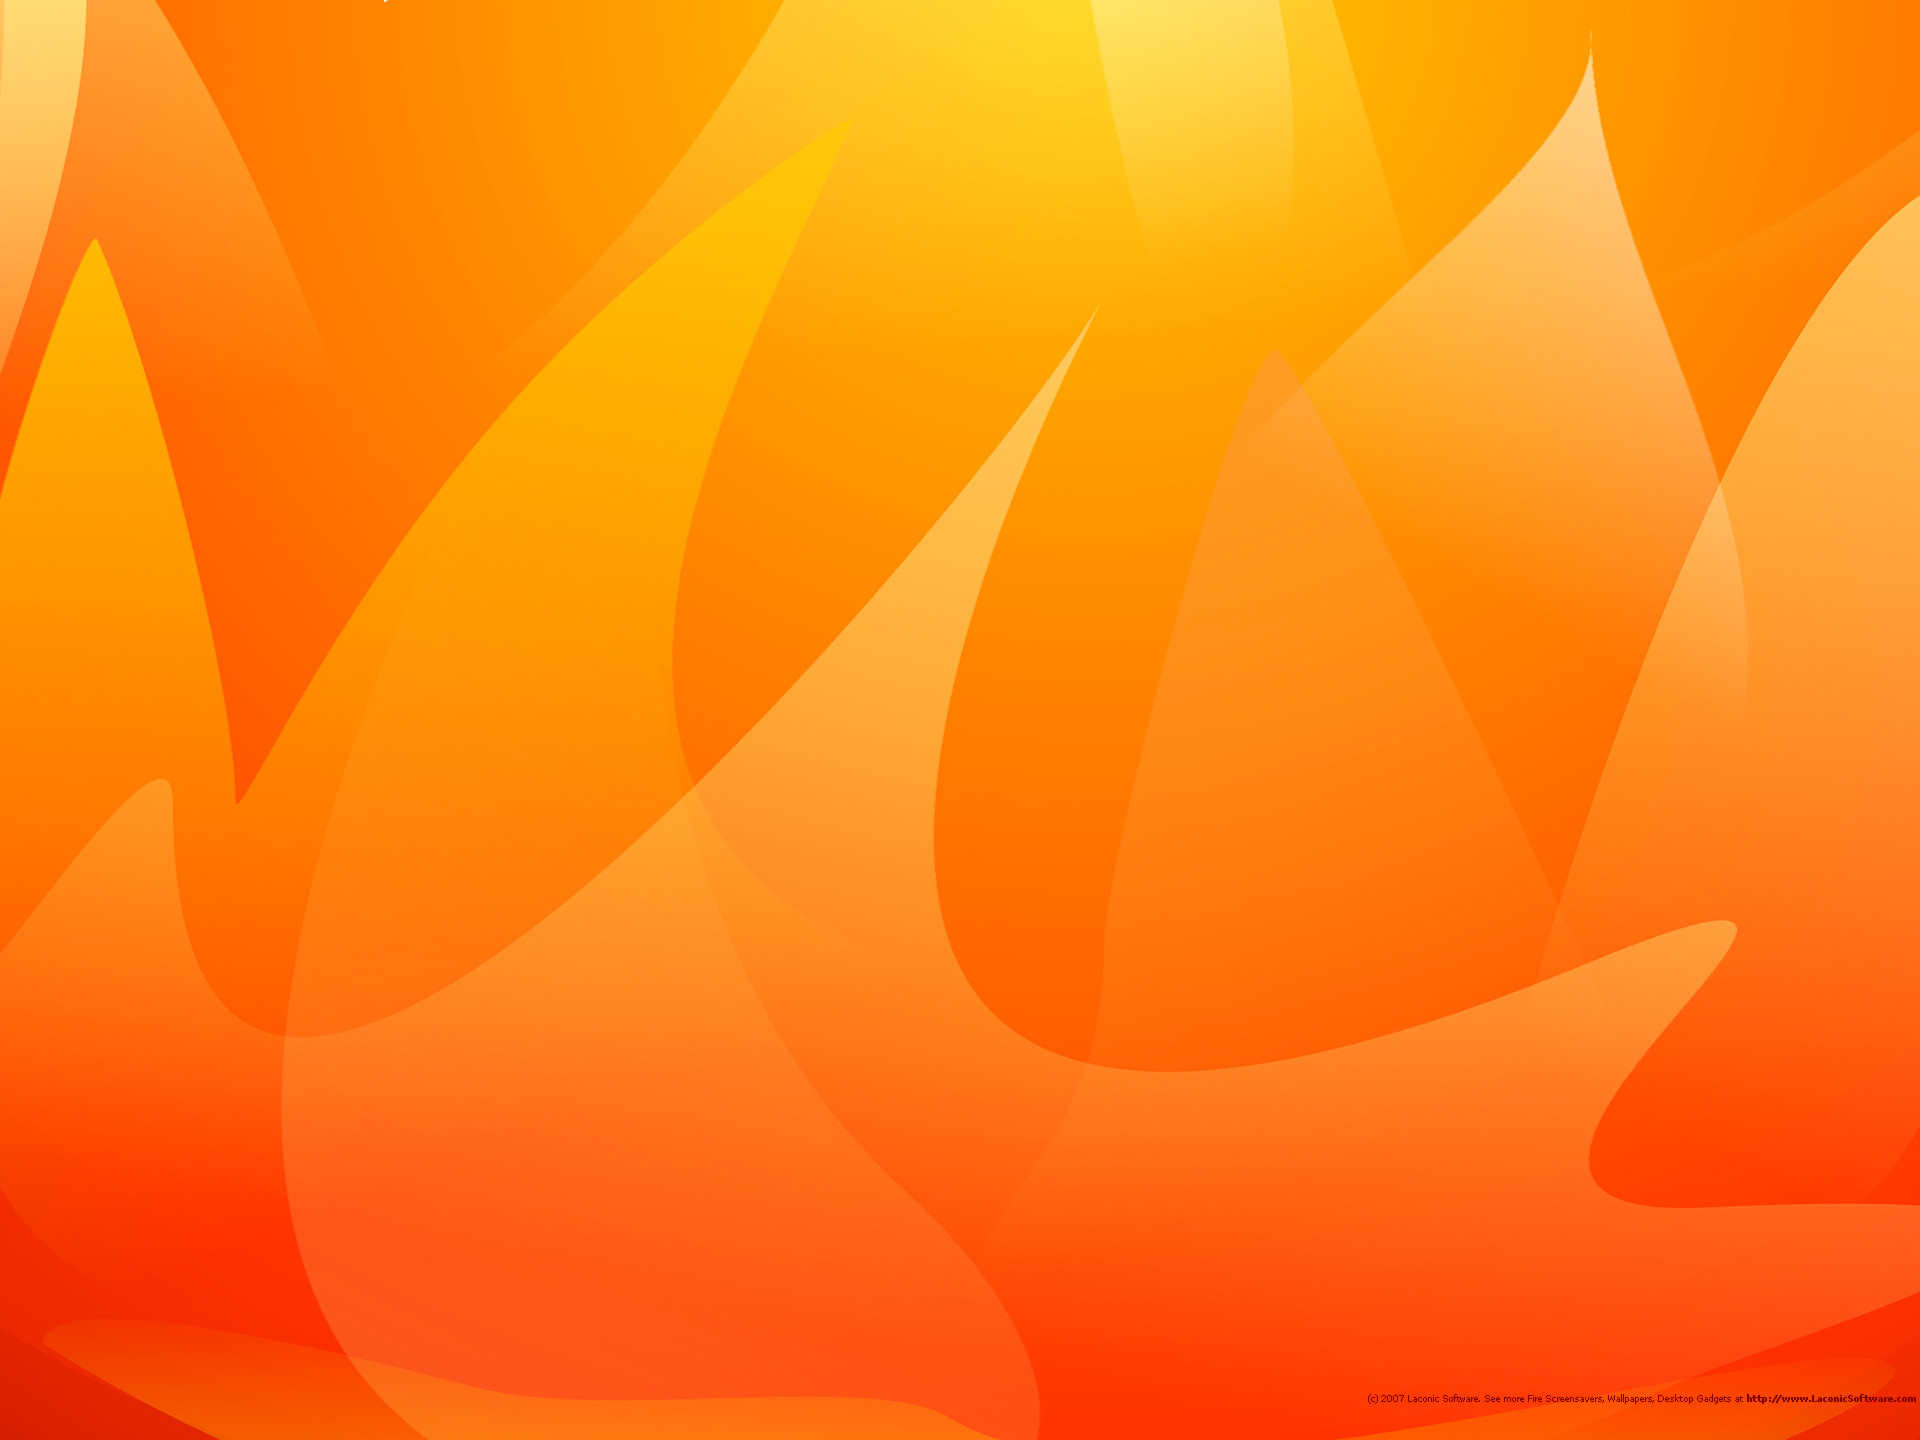 1920x1440 Flame Wallpapers Top 42 Quality Cool Flame Backgrounds 